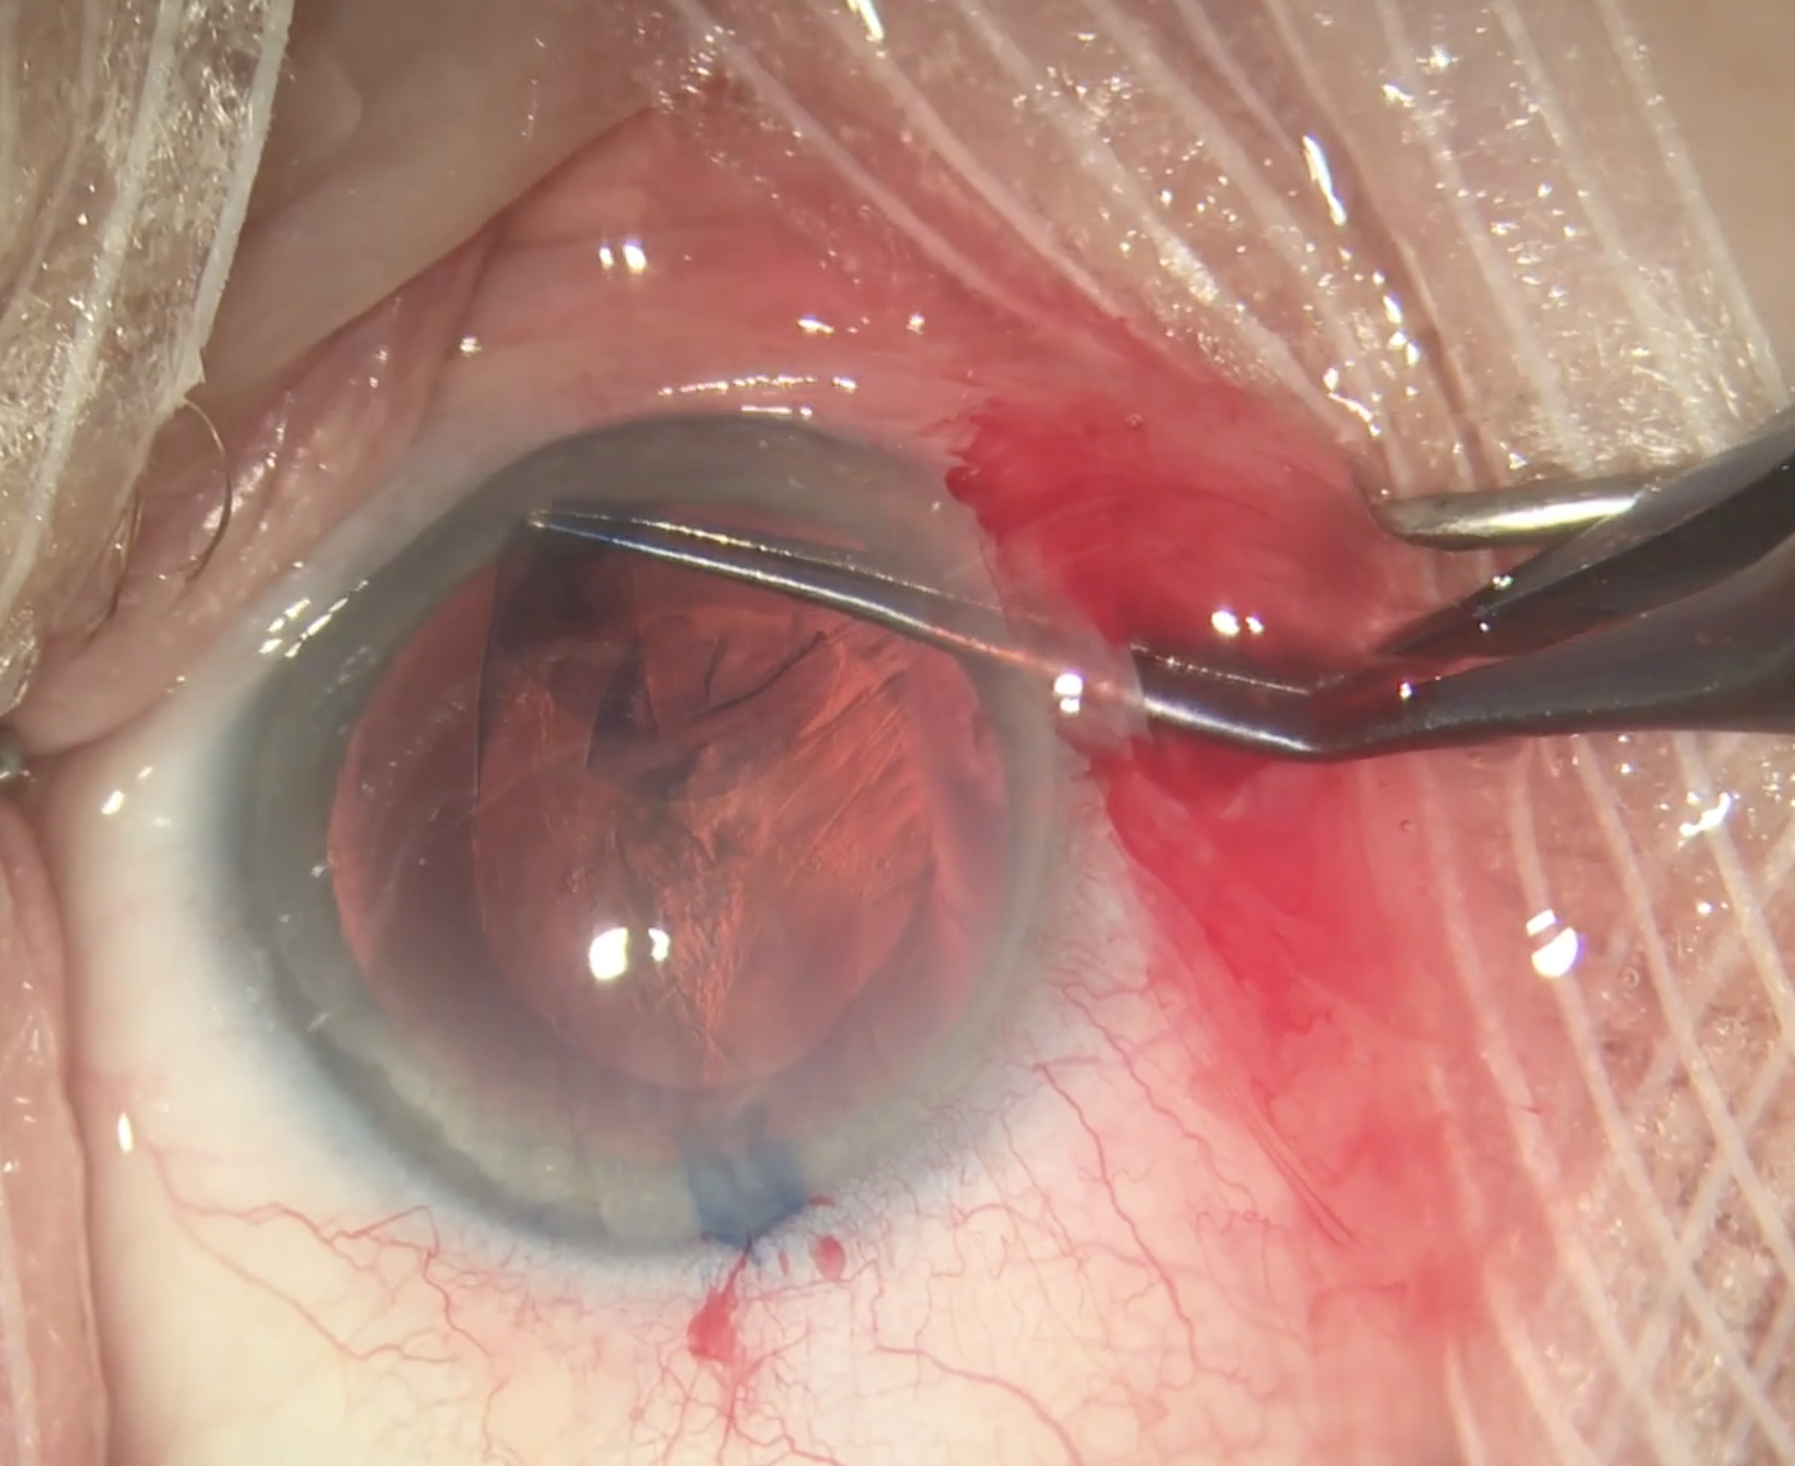 When evaluating the pooled effect of soft vs. standard steroids on post-cataract surgery IOP in the current study, no significant difference was found between the groups.